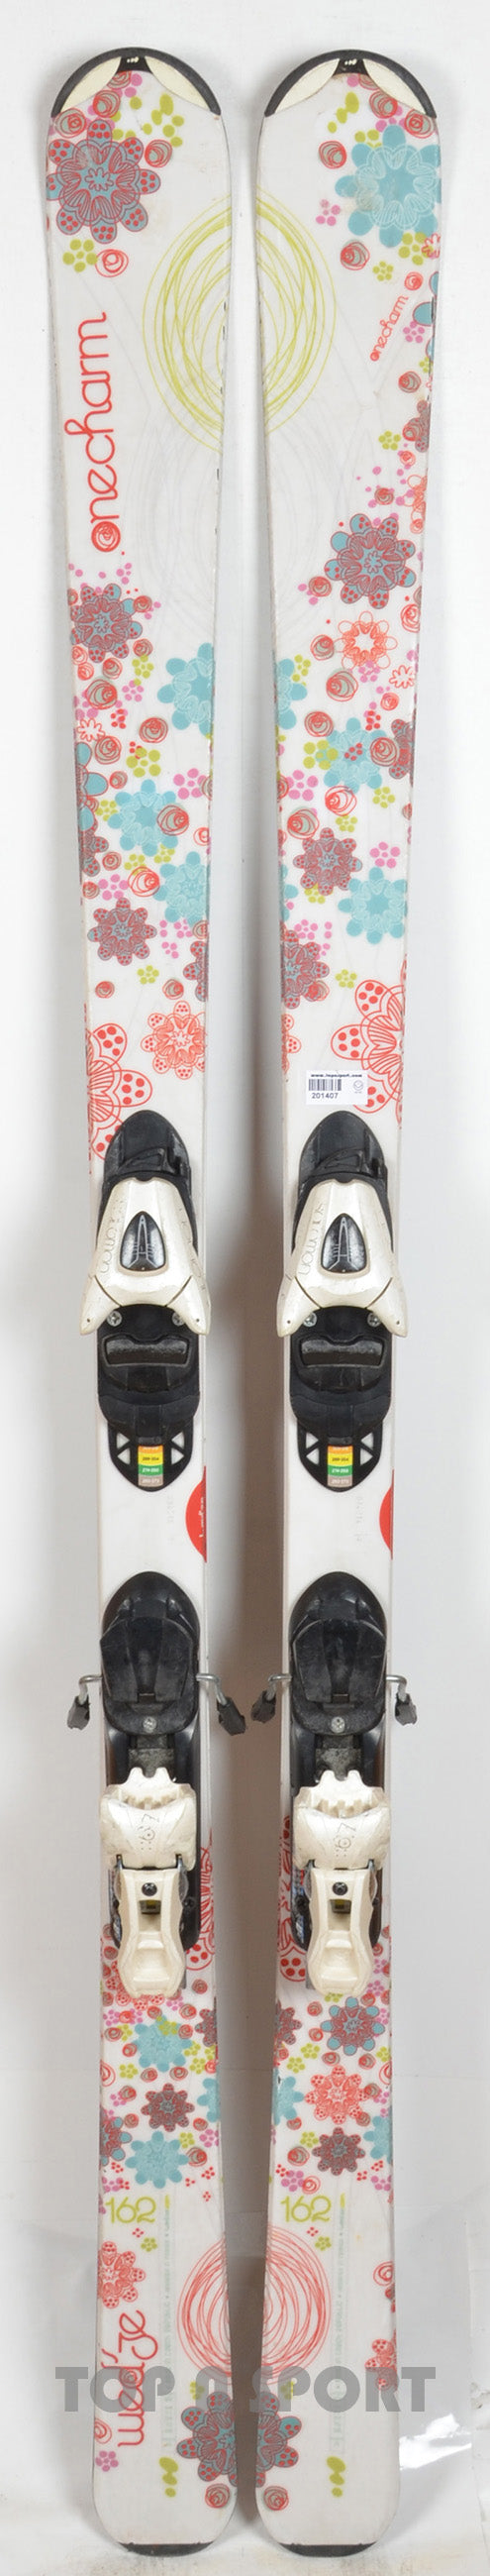 Wedze ONECHARM white - skis d'occasion Femme